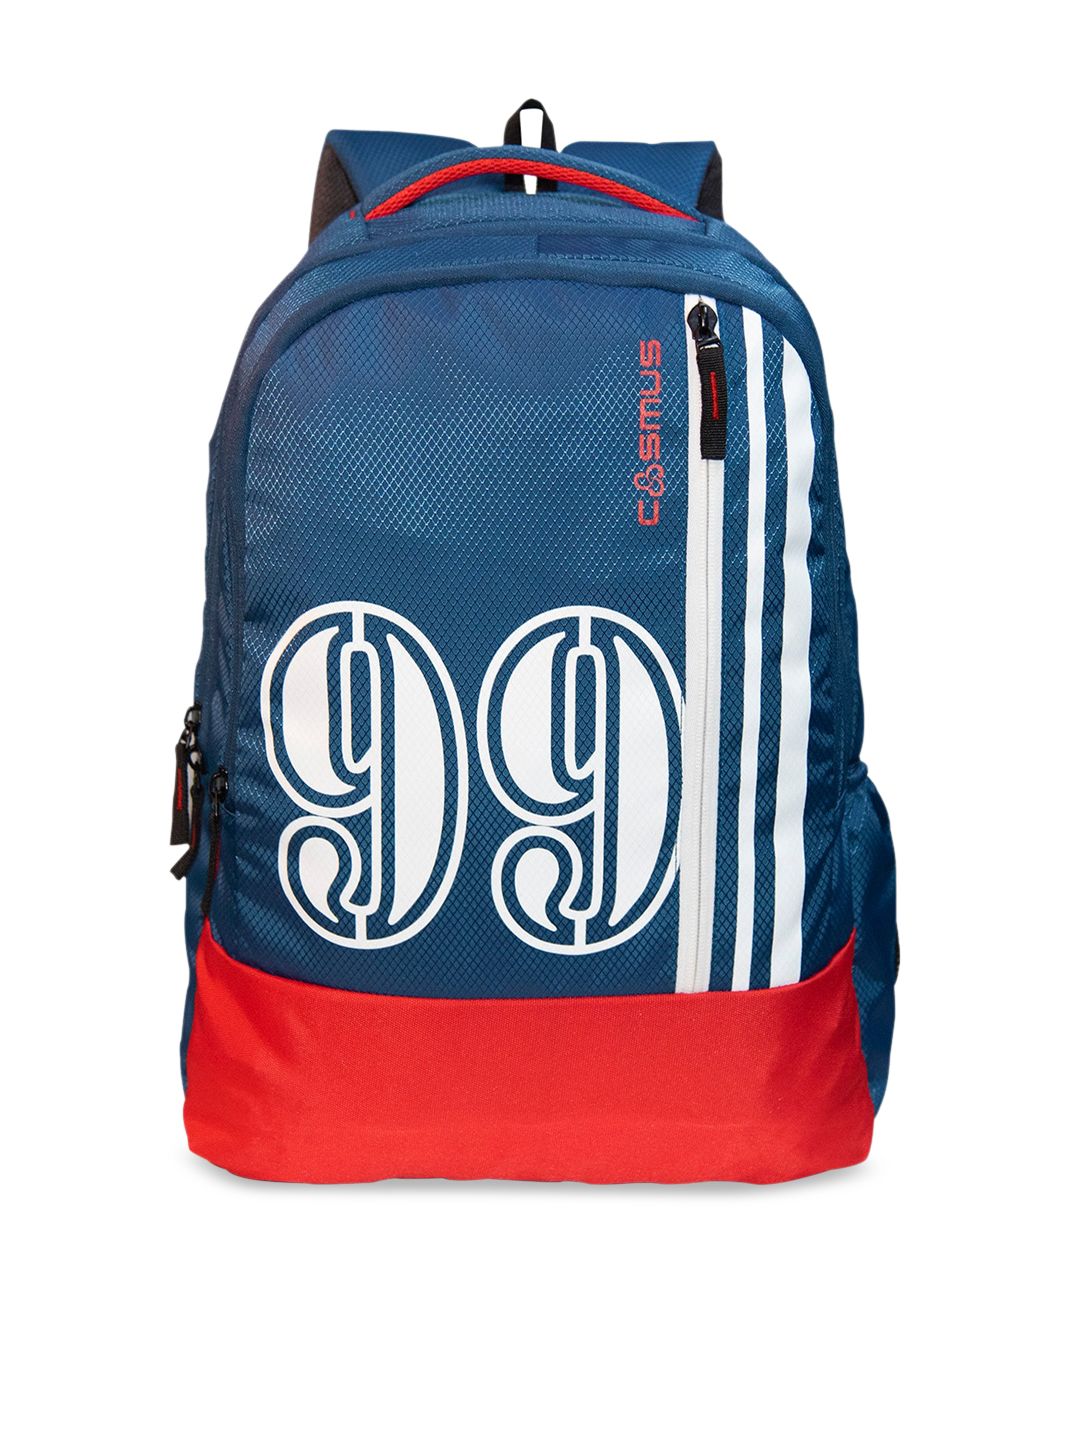 COSMUS Unisex Navy Blue & Red Solid Backpack Price in India